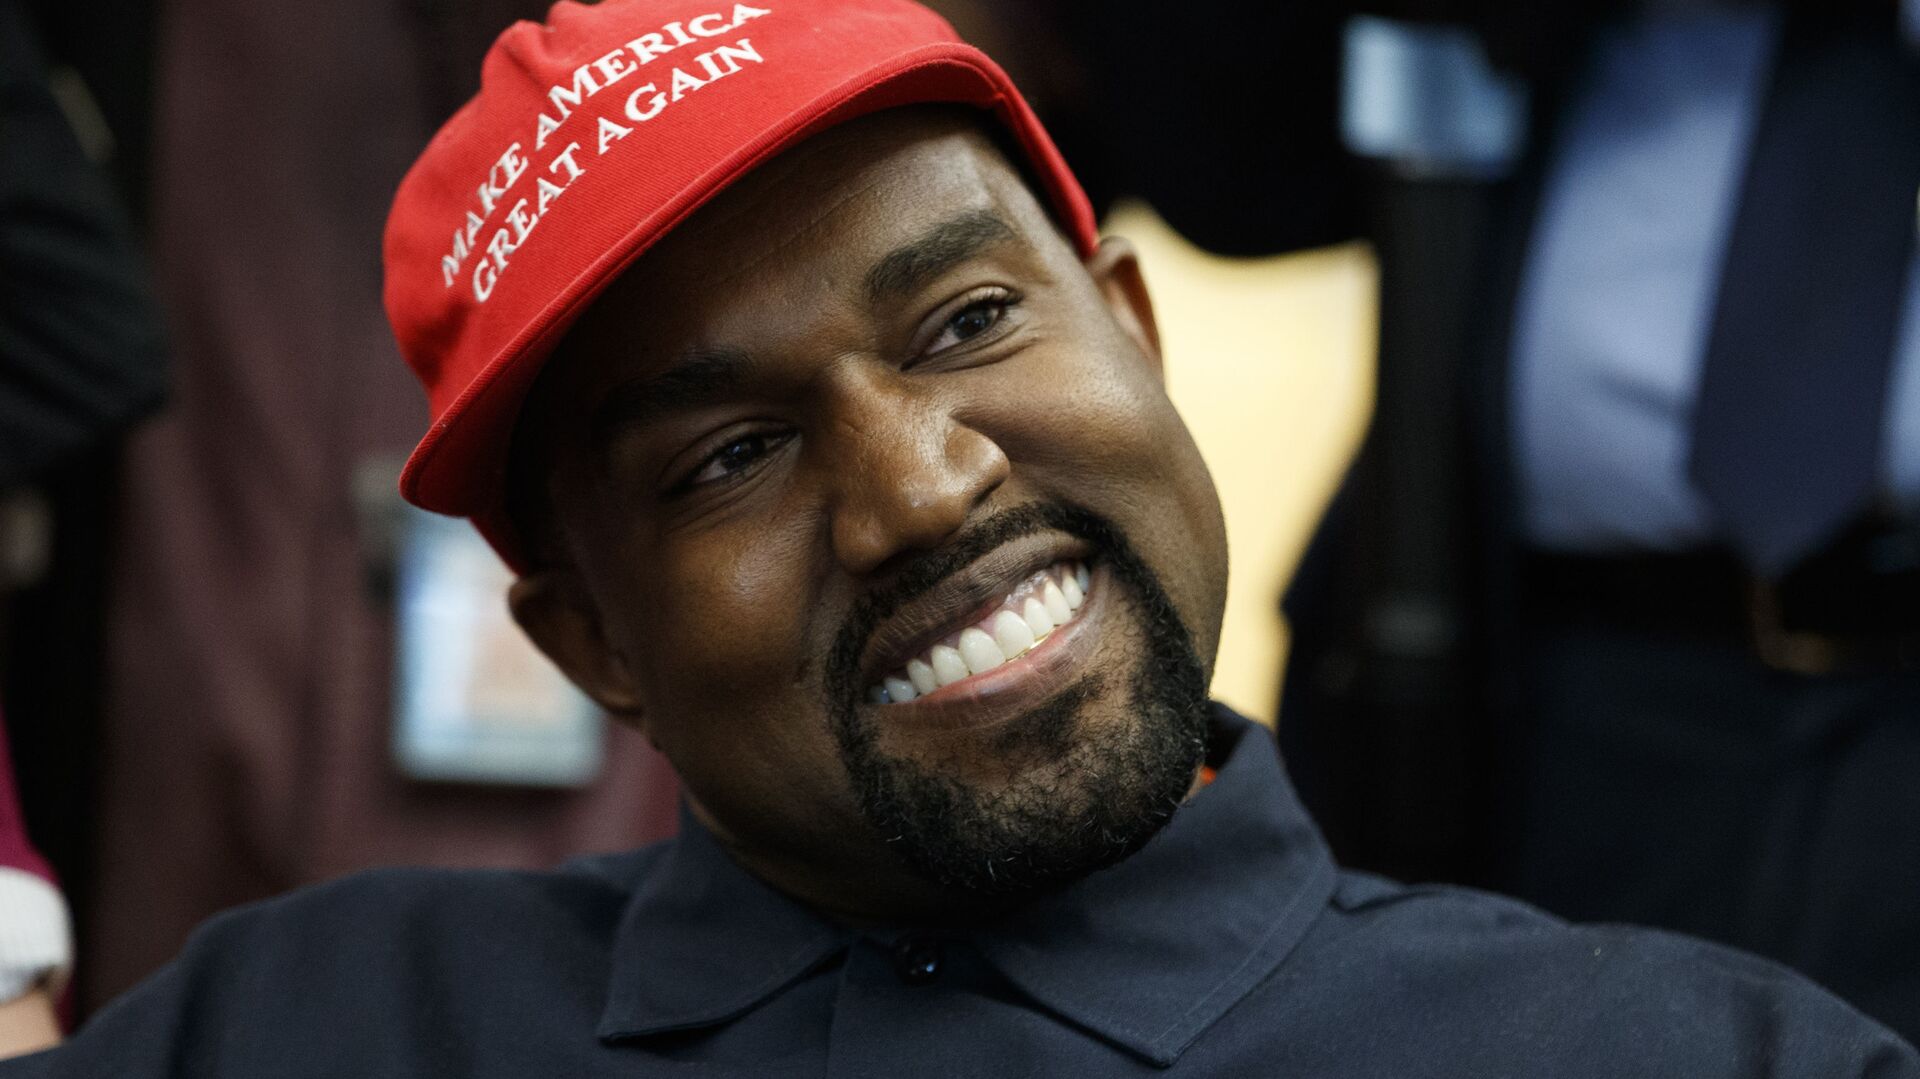 Rapper Kanye West smiles as he listens to a question from a reporter during a meeting in the Oval Office of the White House with President Donald Trump, Thursday, Oct. 11, 2018, in Washington. (AP Photo/Evan Vucci) - Sputnik International, 1920, 18.02.2022